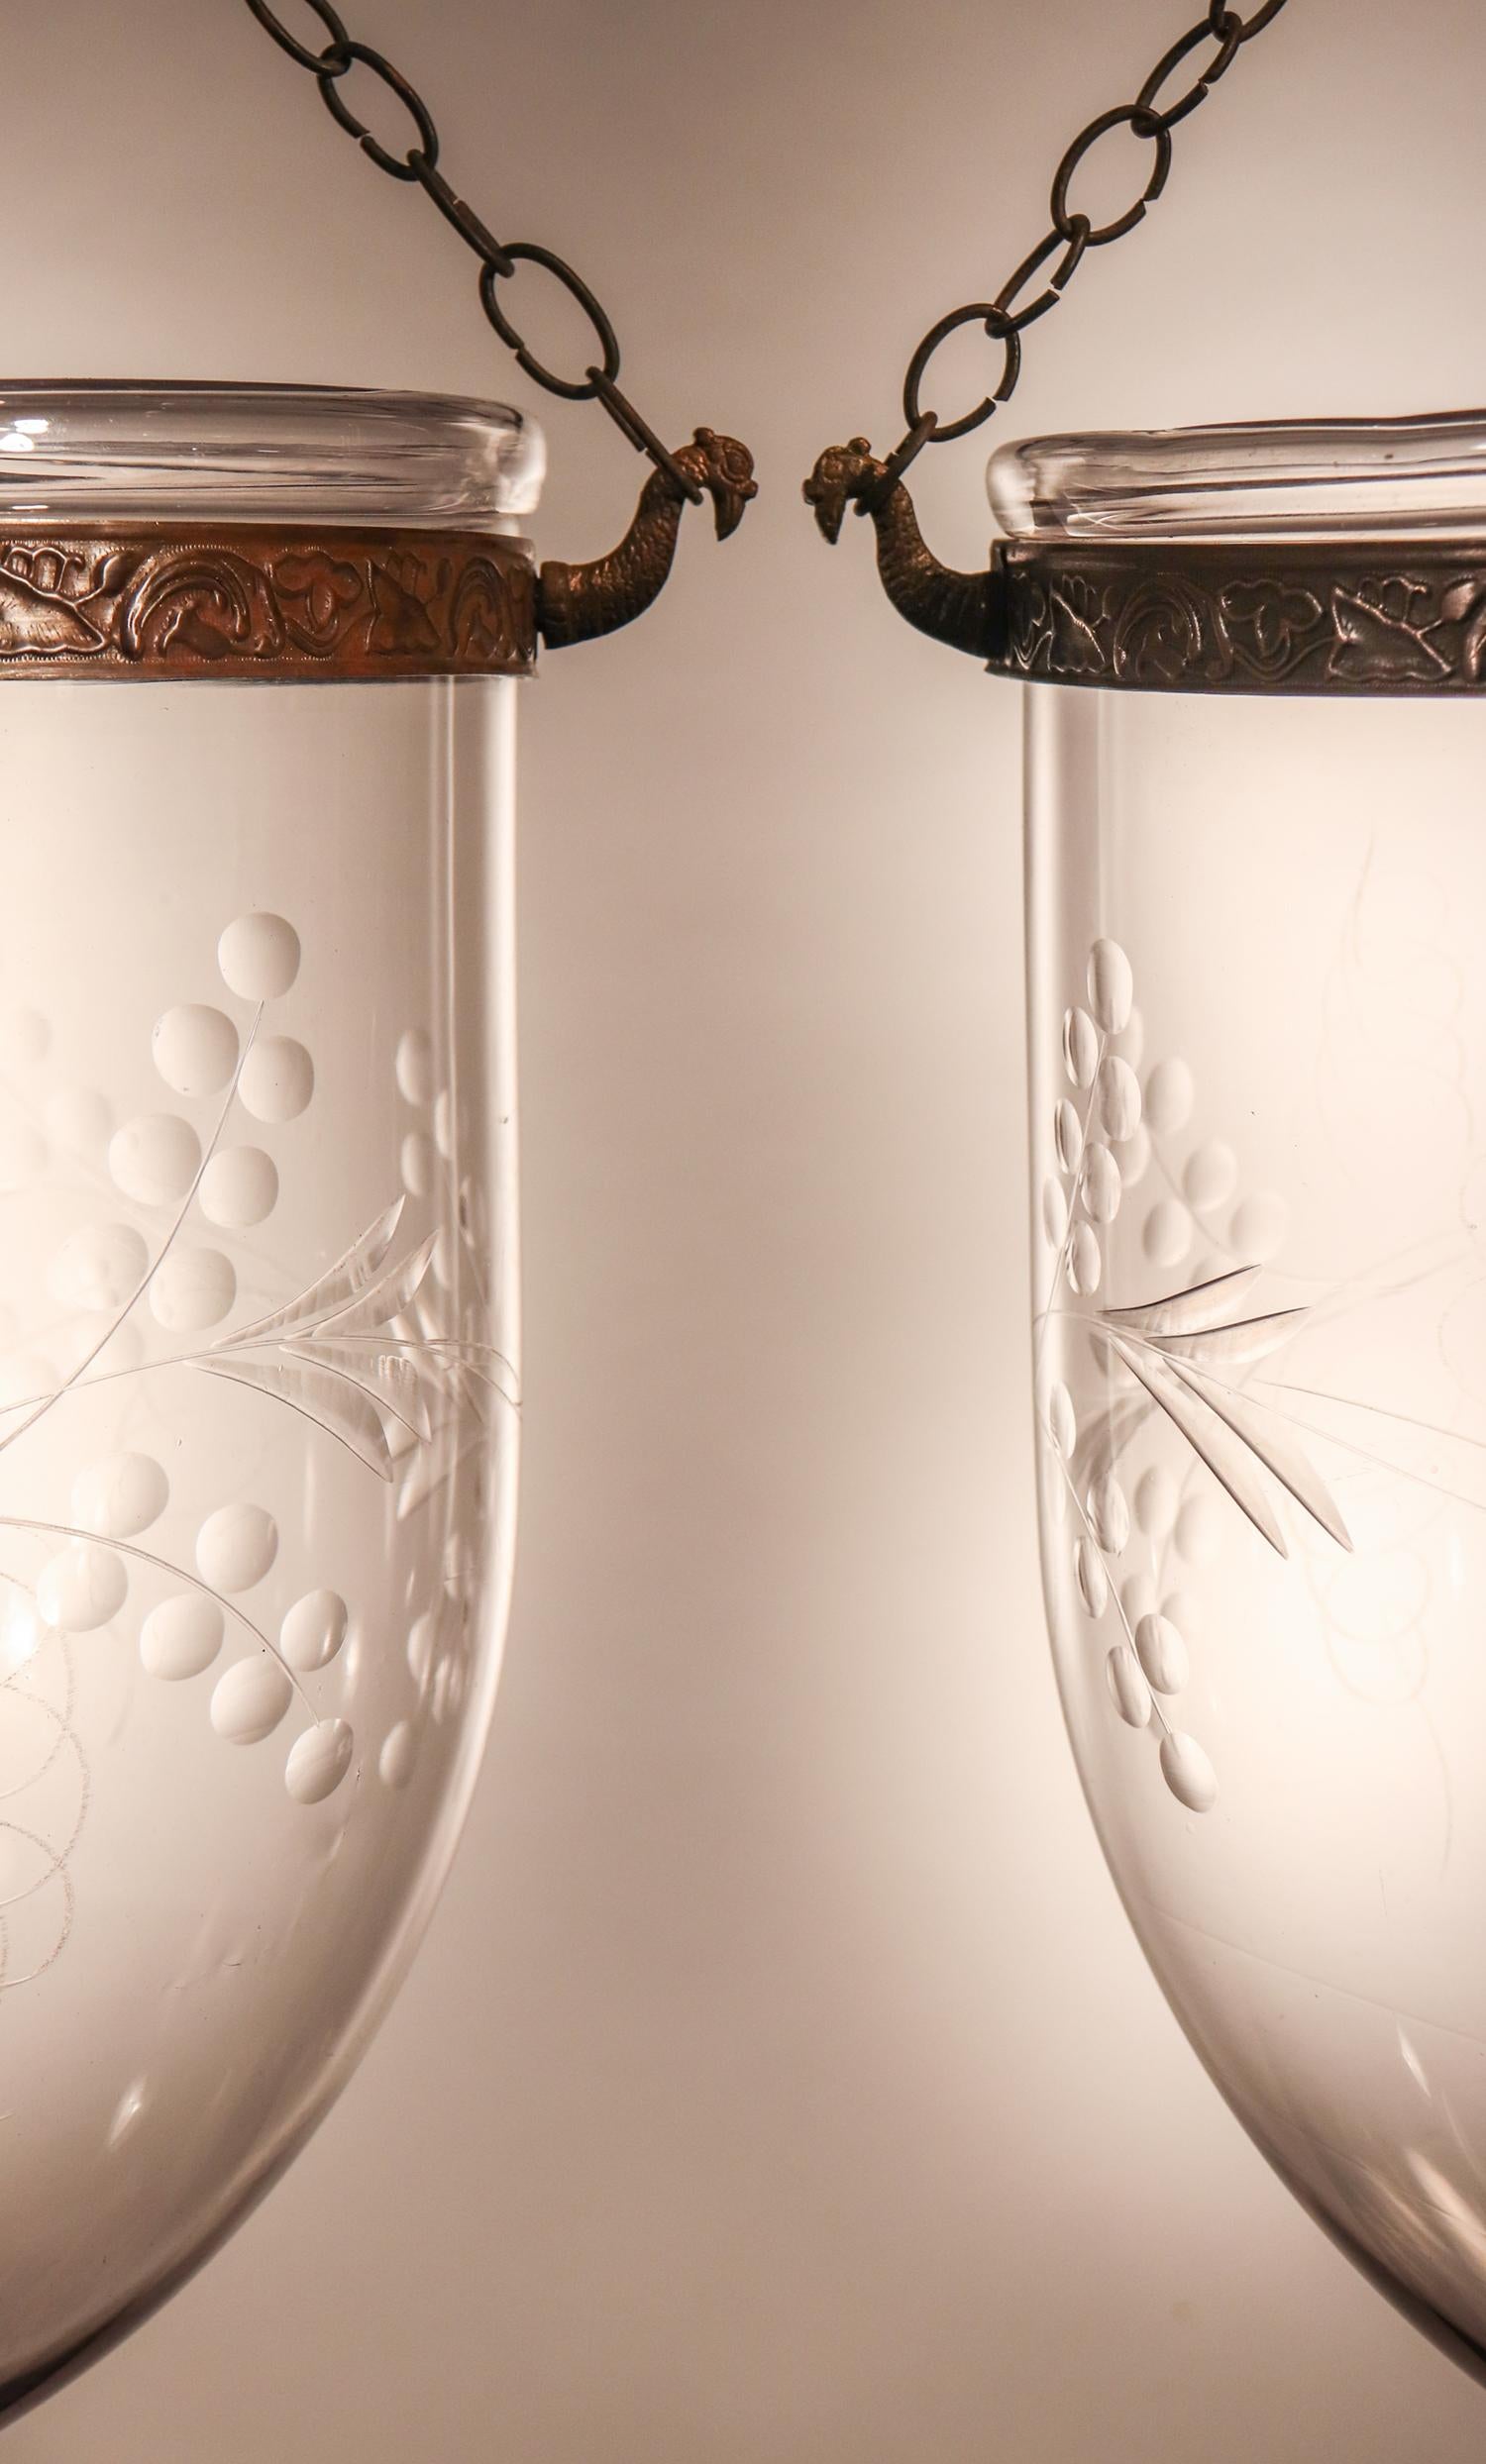 Etched Pair of Antique Bell Jar Lanterns with Vine Etching